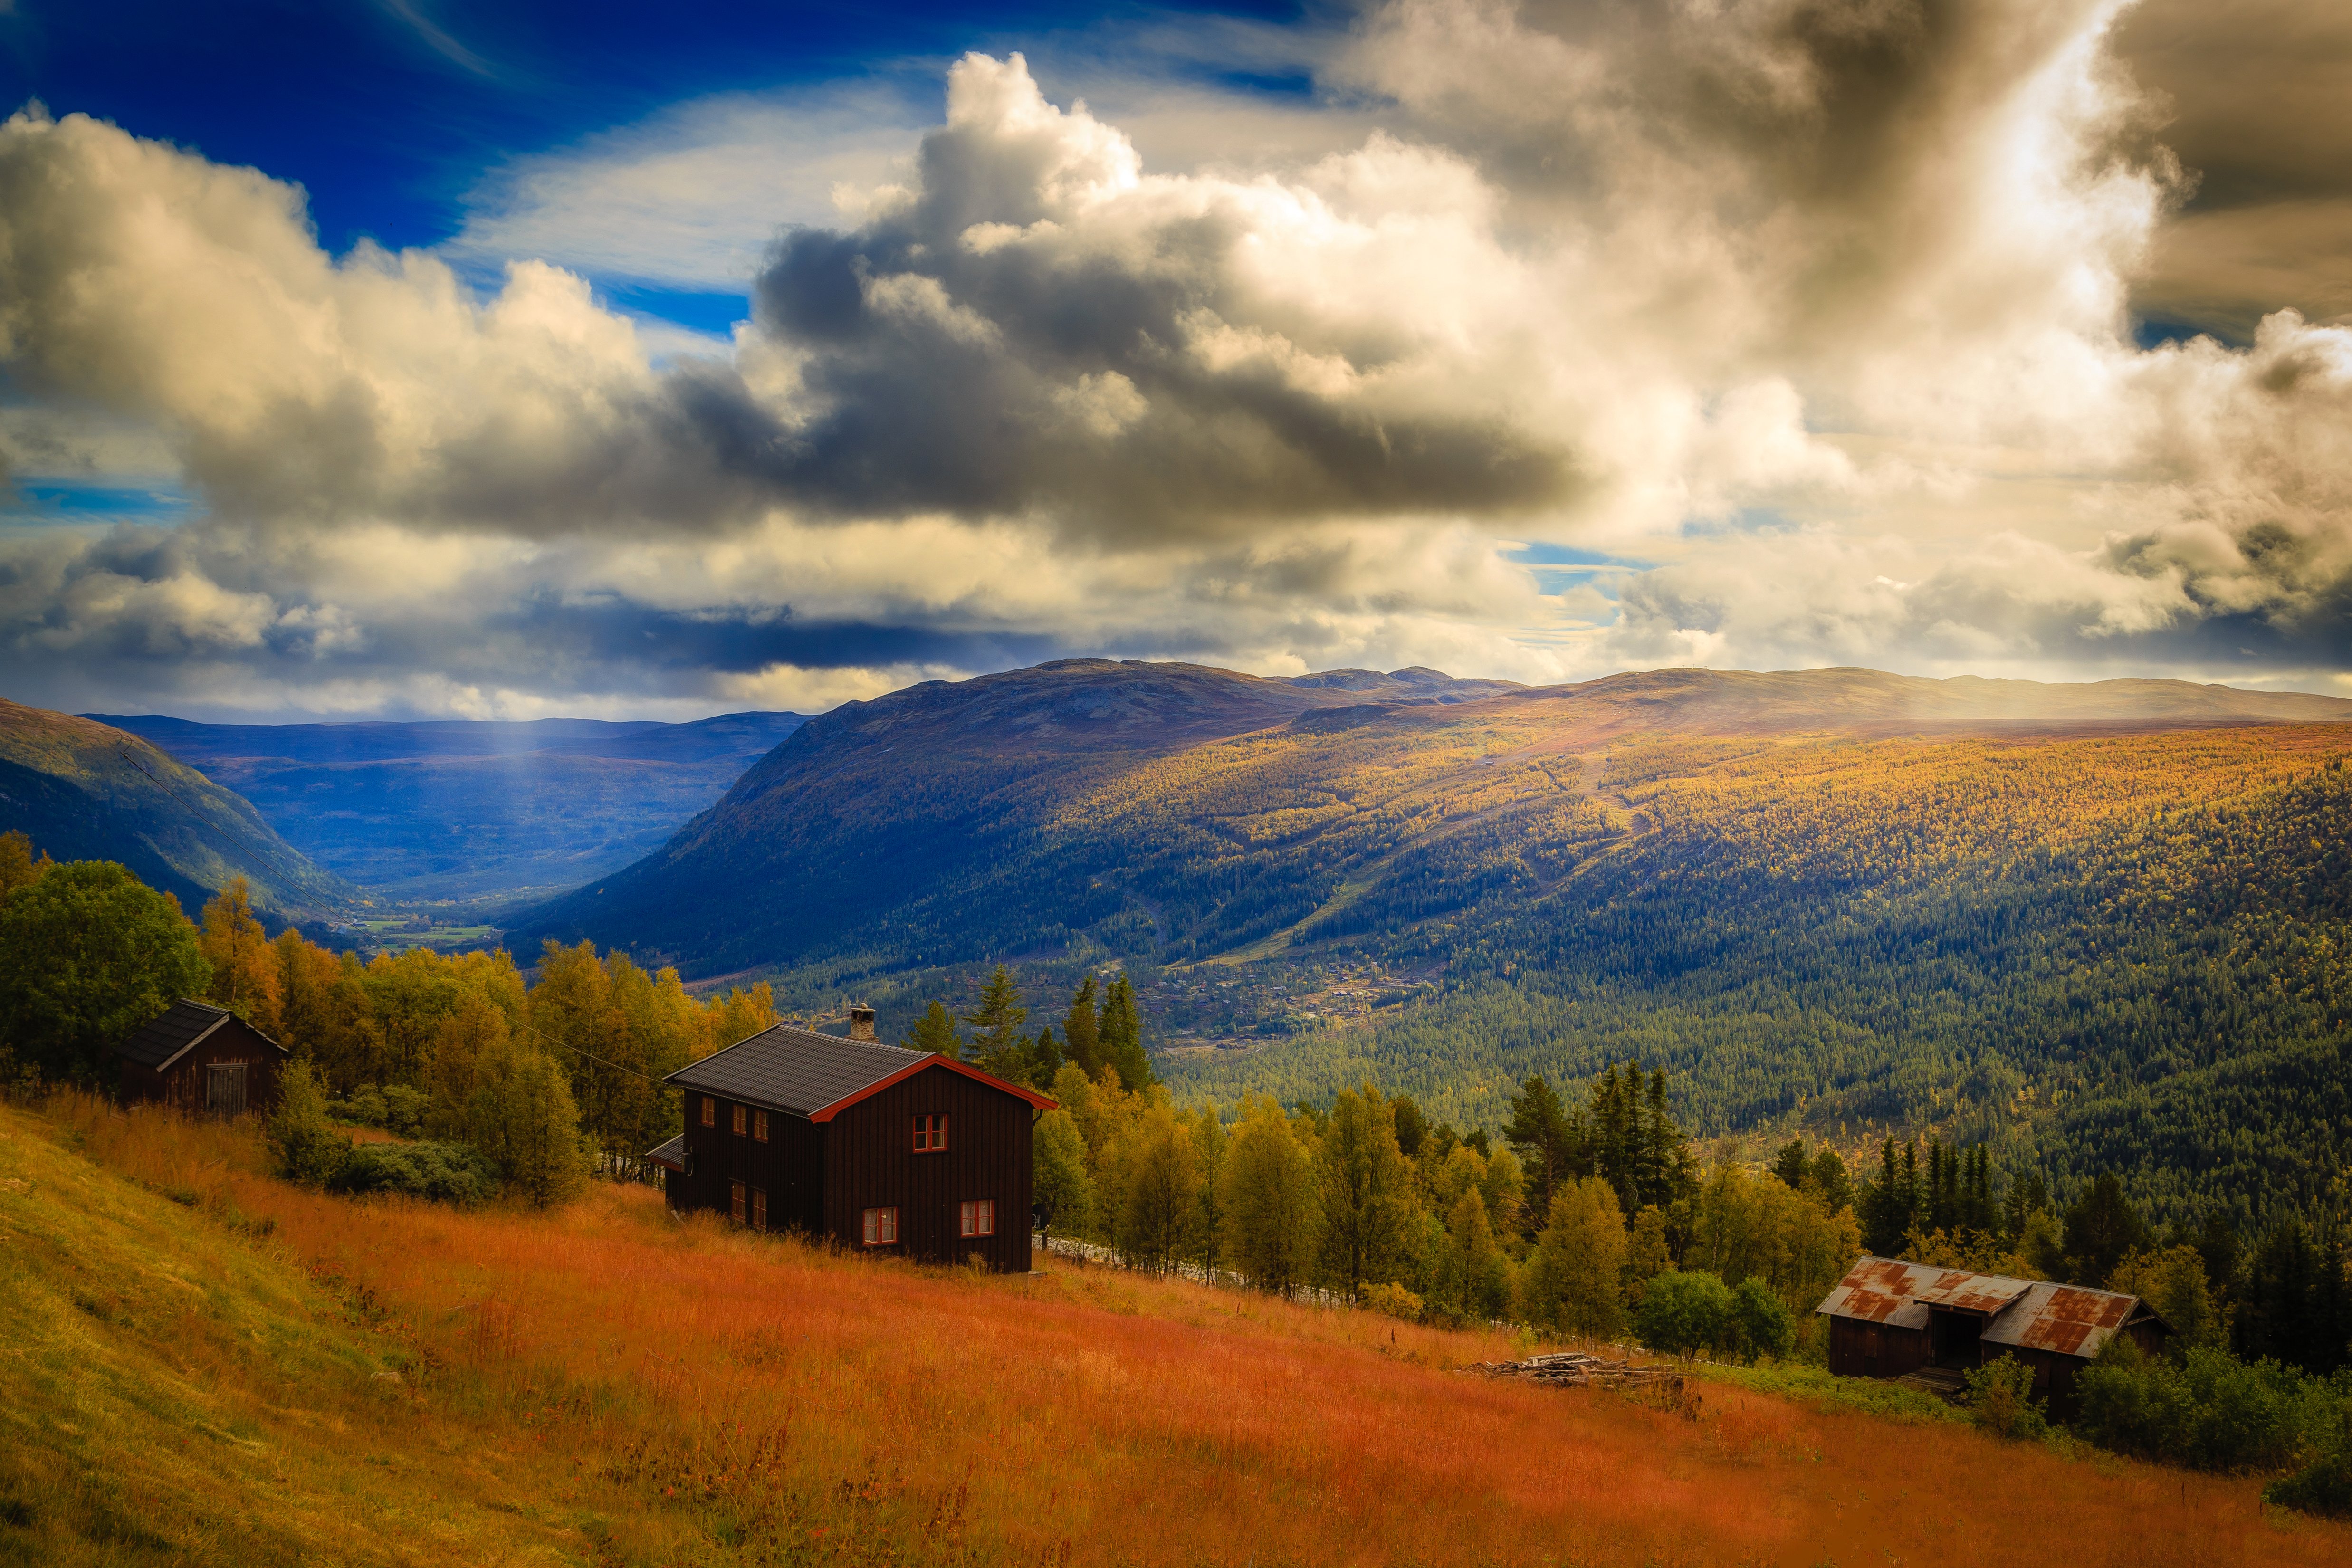 norway, Scenery, Mountains, Houses, Forests, Clouds, Hardangervidda, Nature Wallpaper